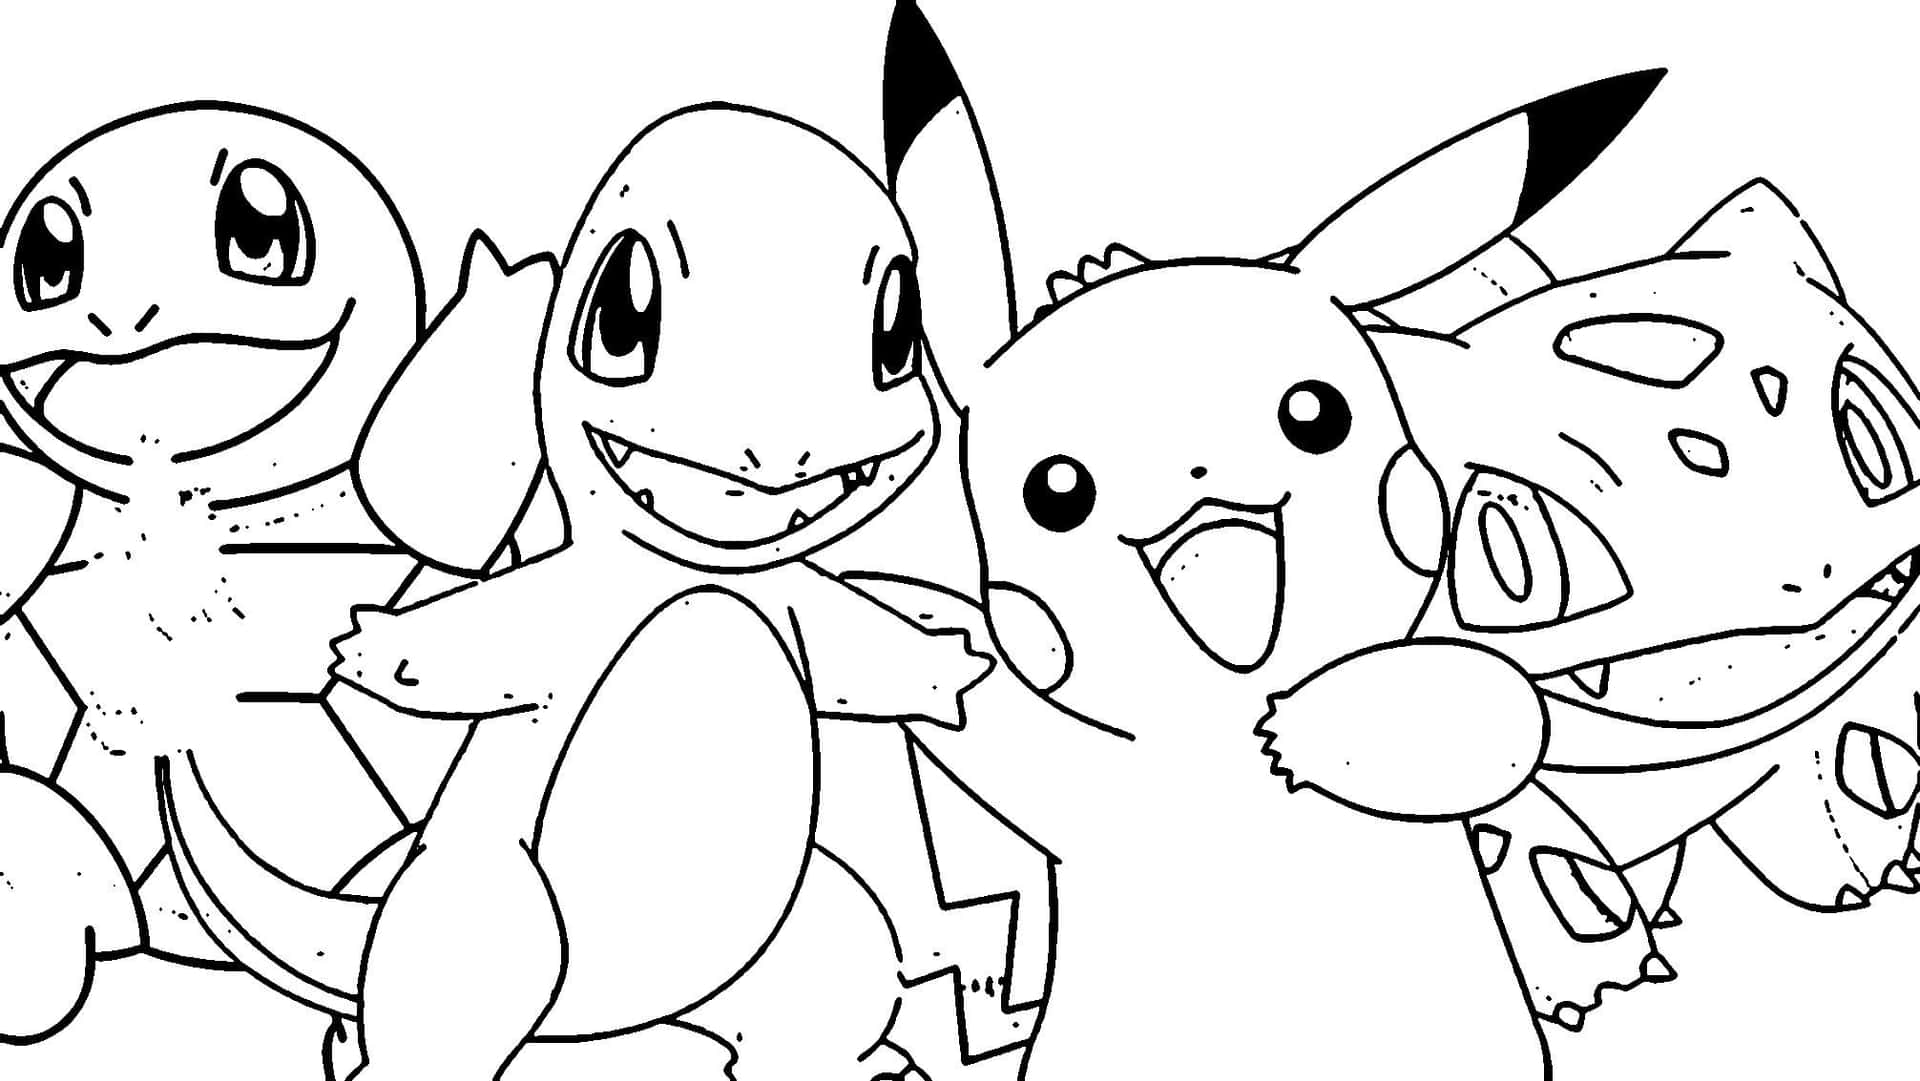 Put Your Coloring Skills to the Test with this Challenging Pokemon Image.